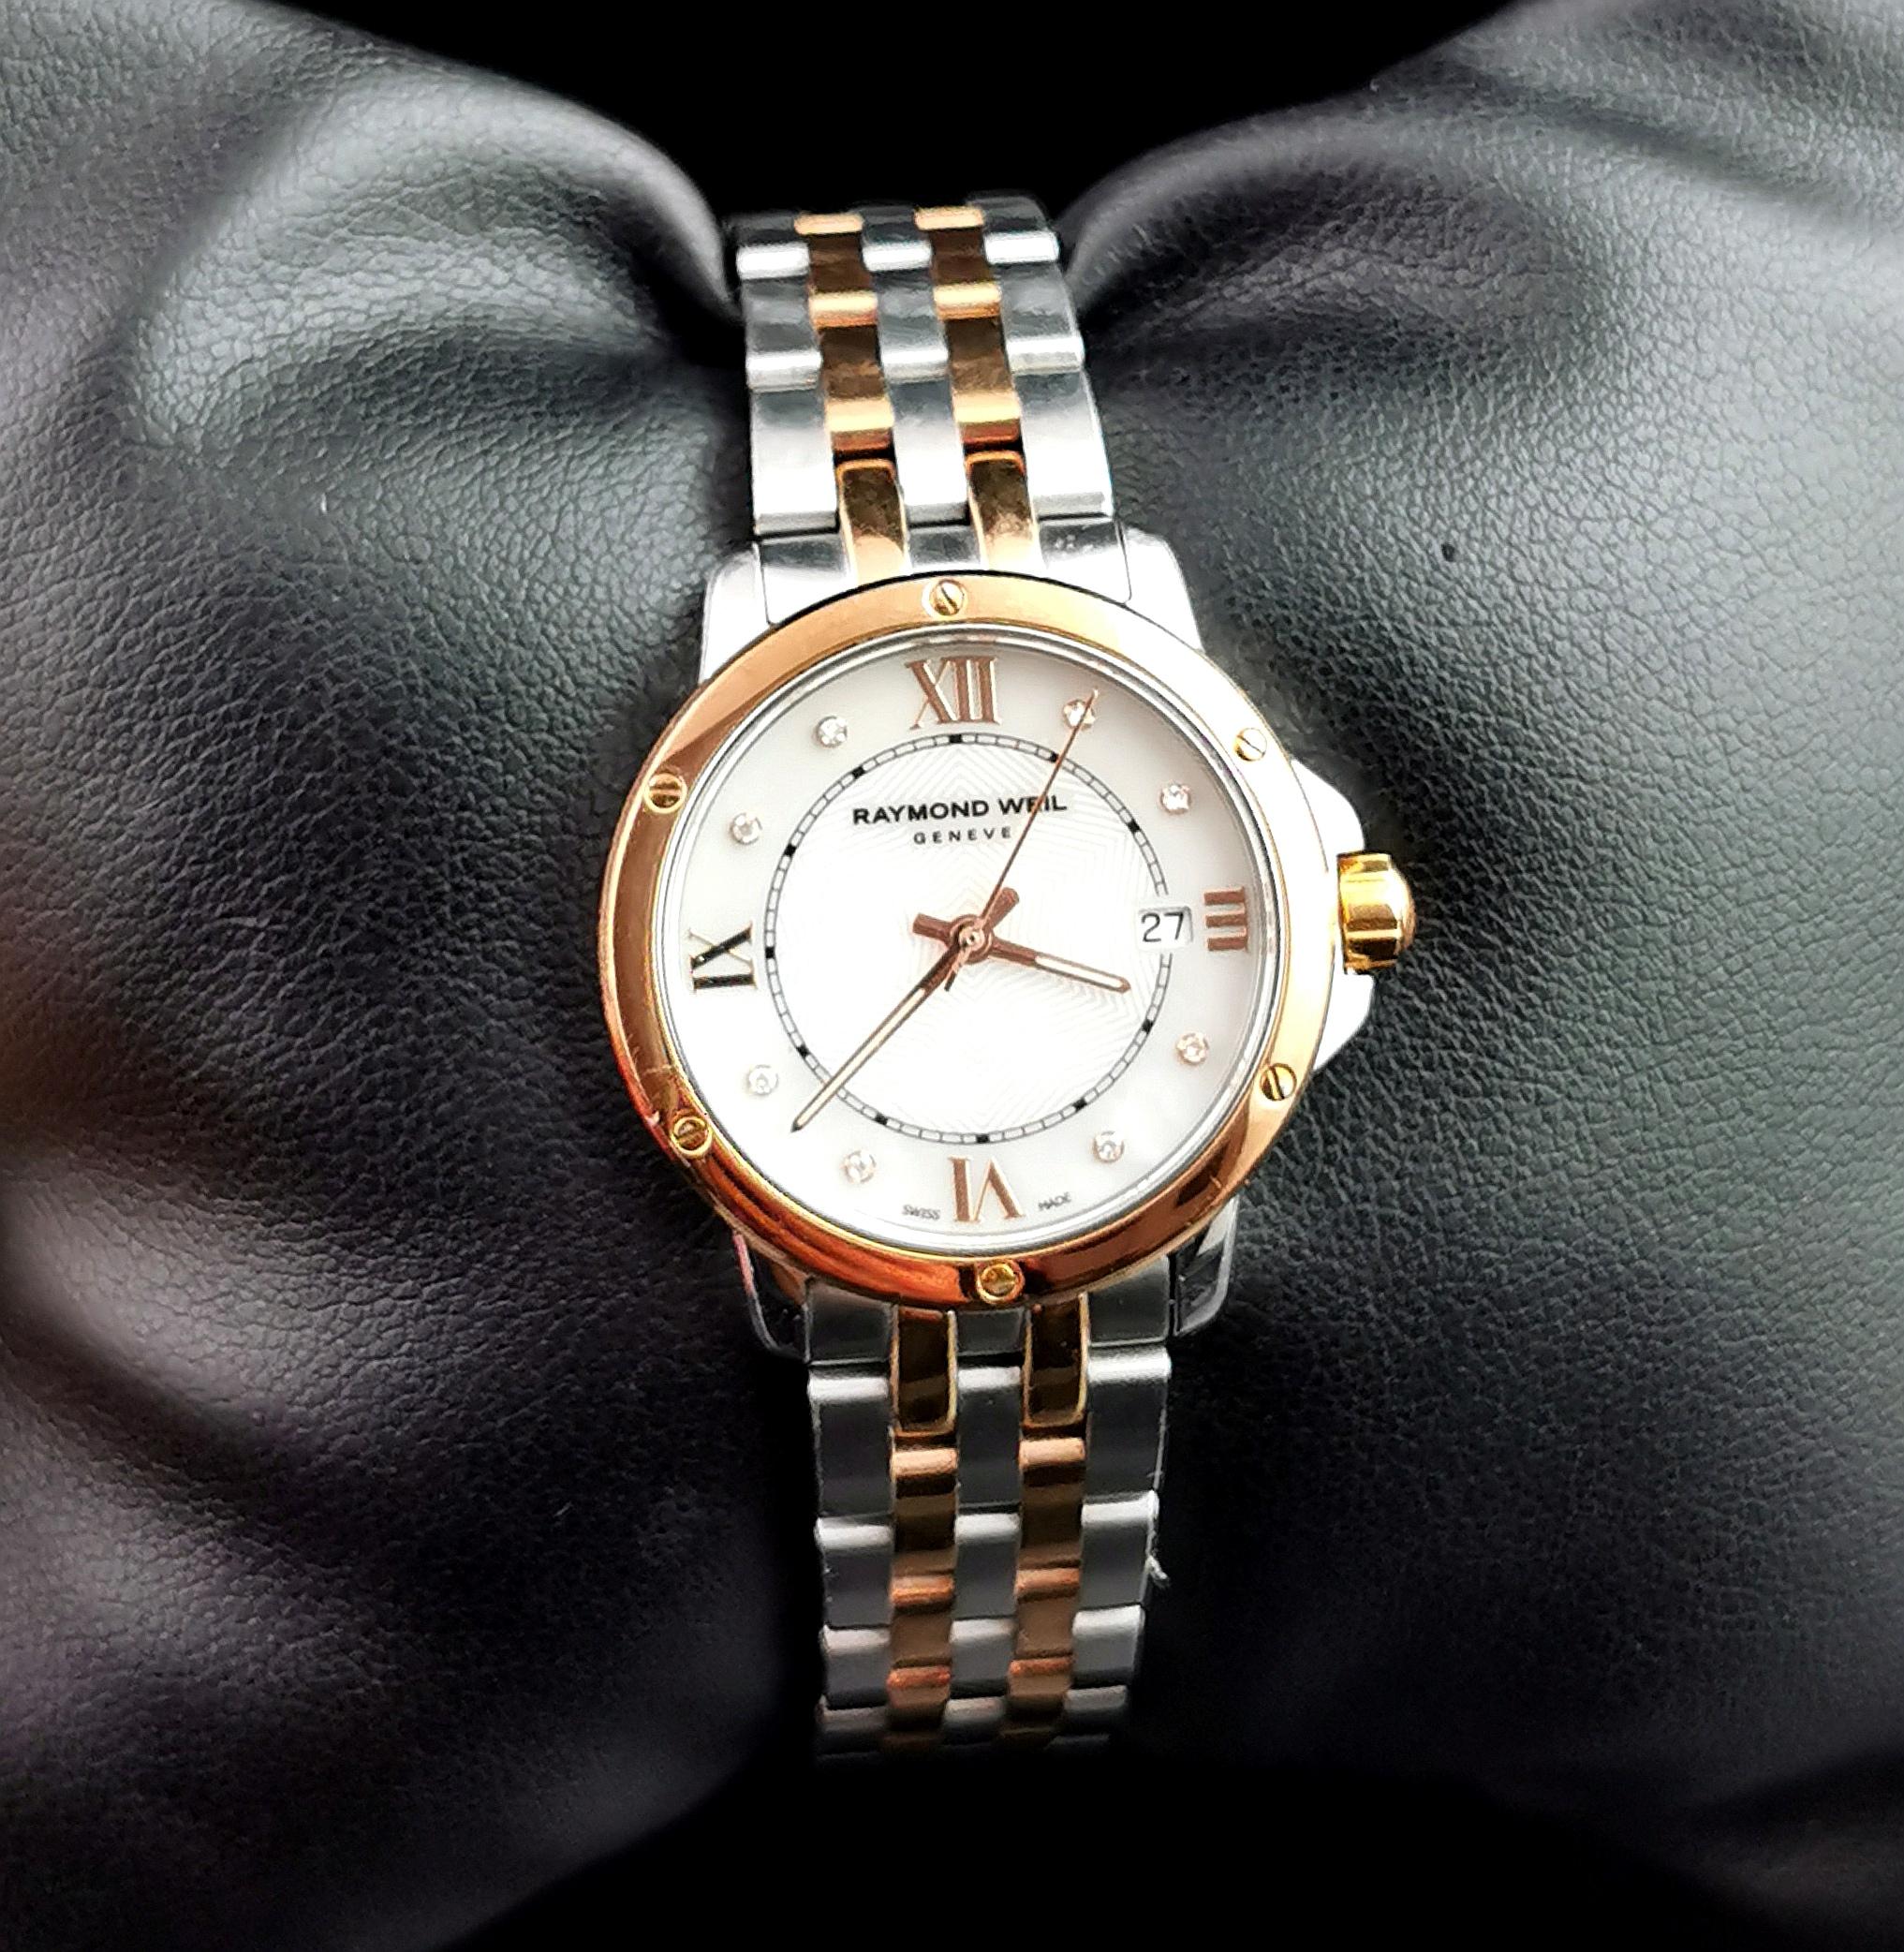 A superbly stylish Raymond Weil ladies Maestro wristwatch.

A gorgeous classic design this superbly crafted ladies watch features a rose gold plated stainless steel strap with a mother of pearl dial and diamond set face.

It has a sapphire crystal,